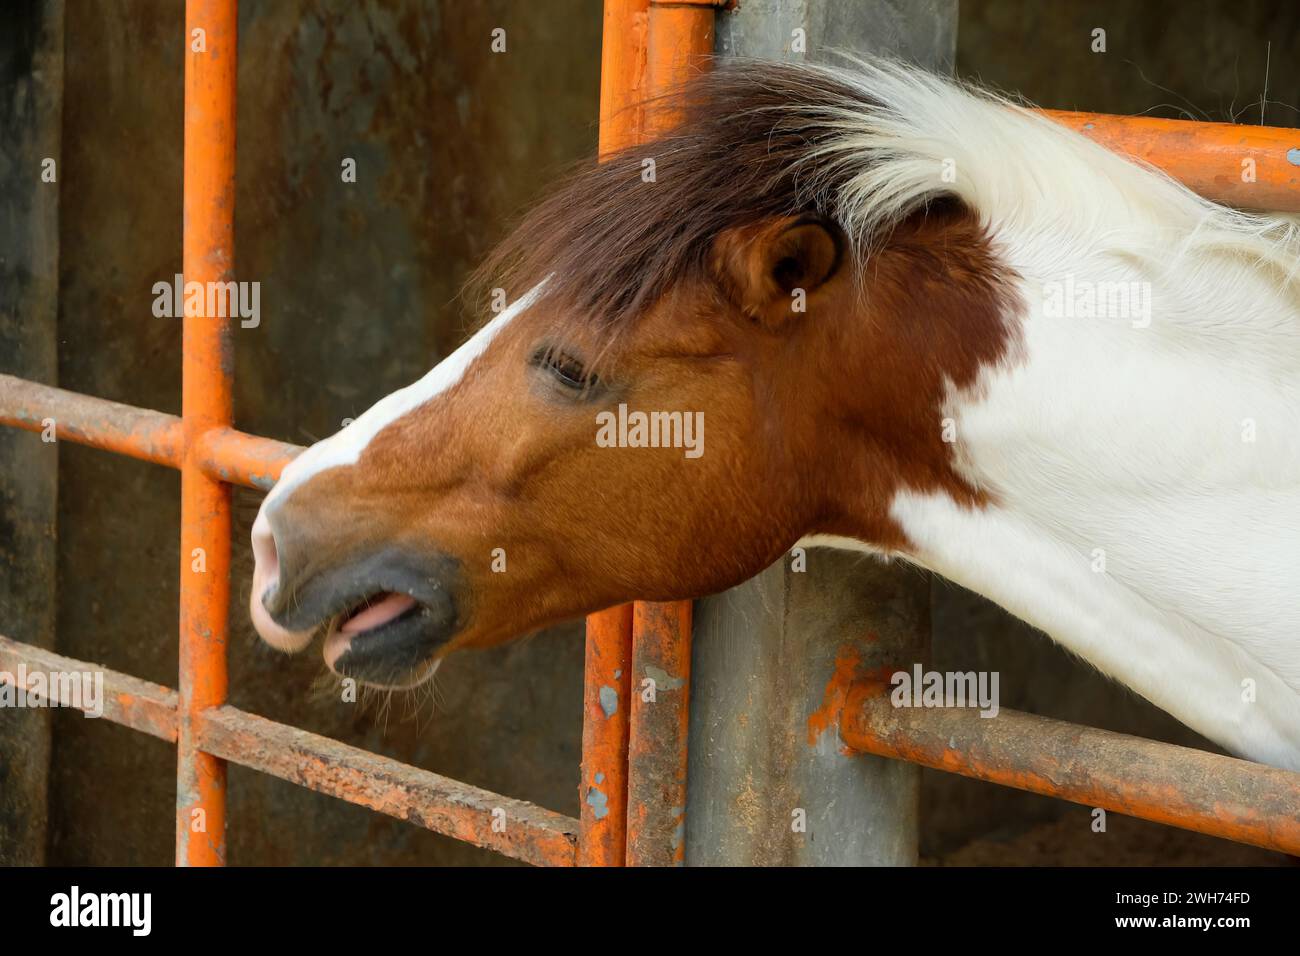 Purebred horse at the stable door. Foal at the stable door. Horse ranch. Stock Photo